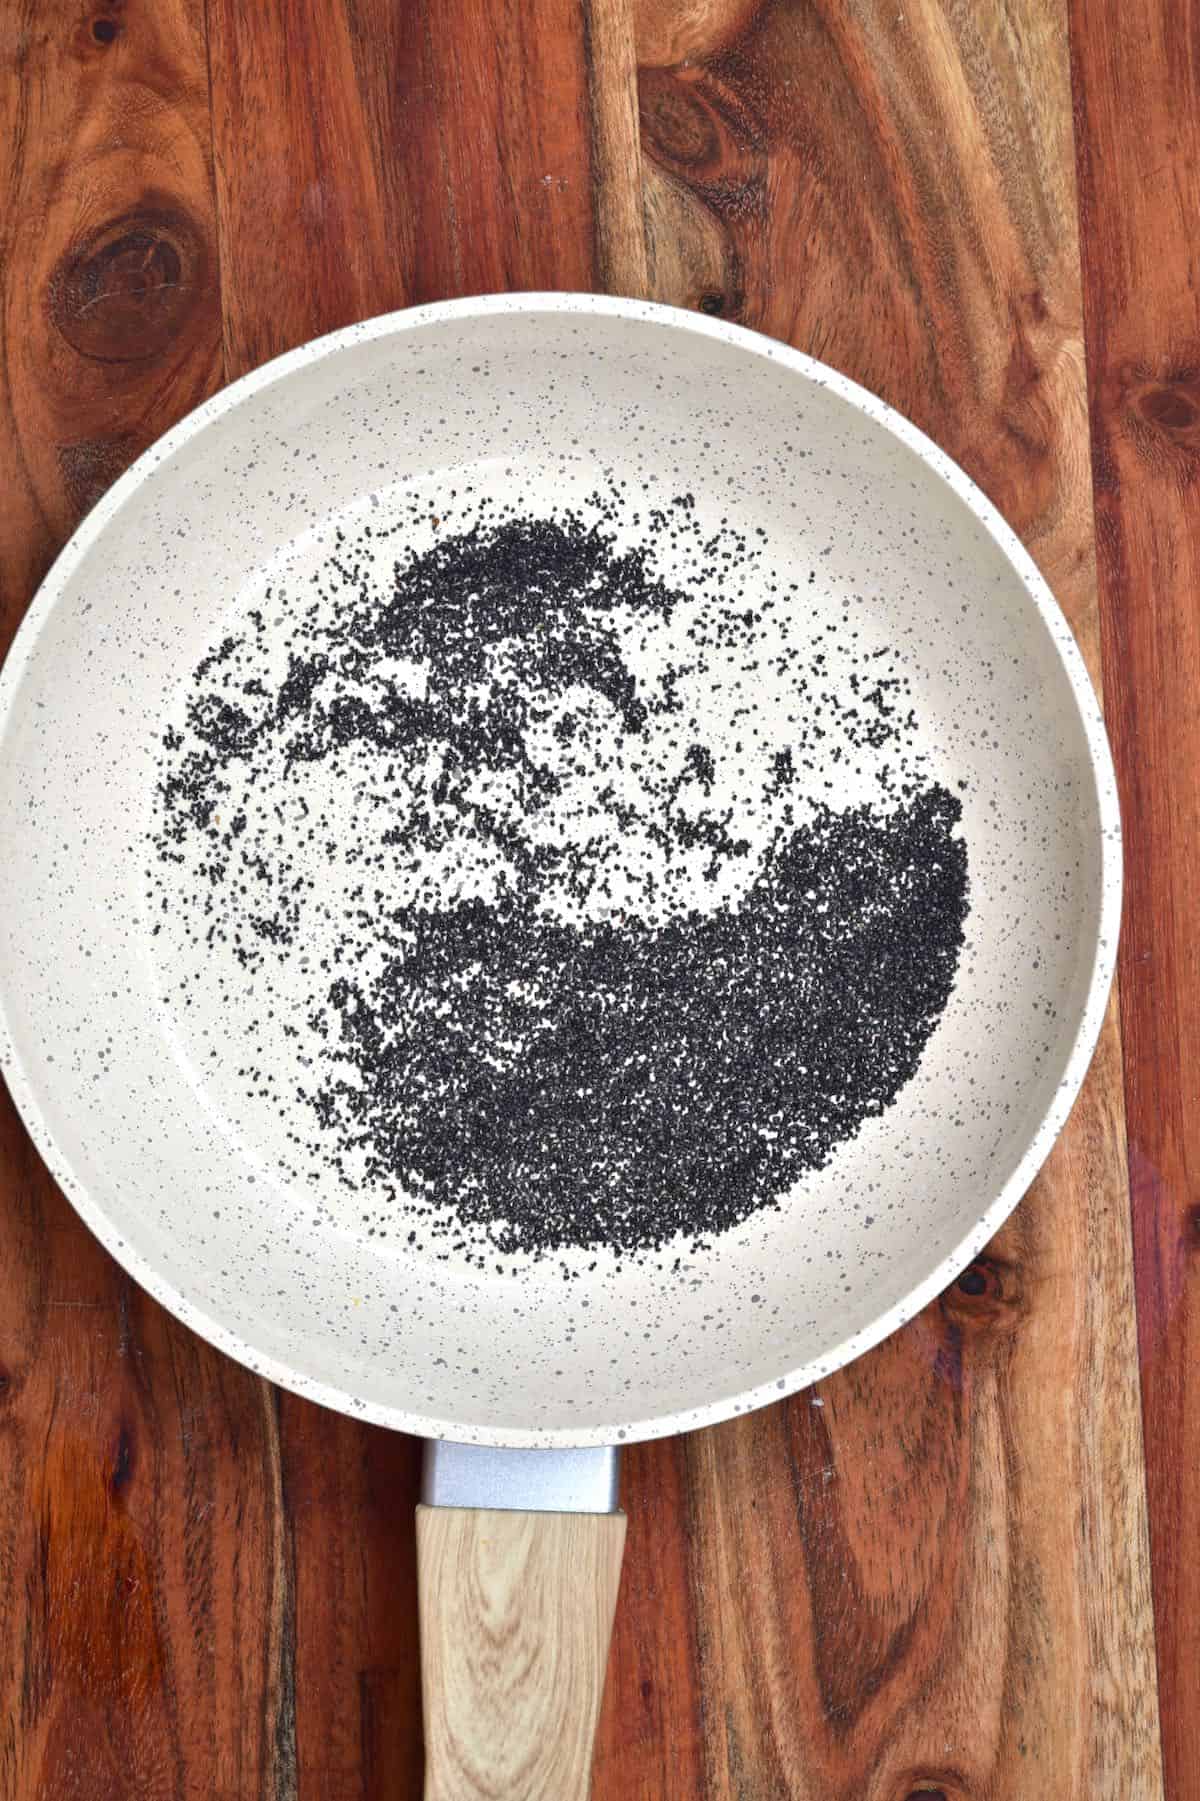 Toasting poppy seeds in a pan